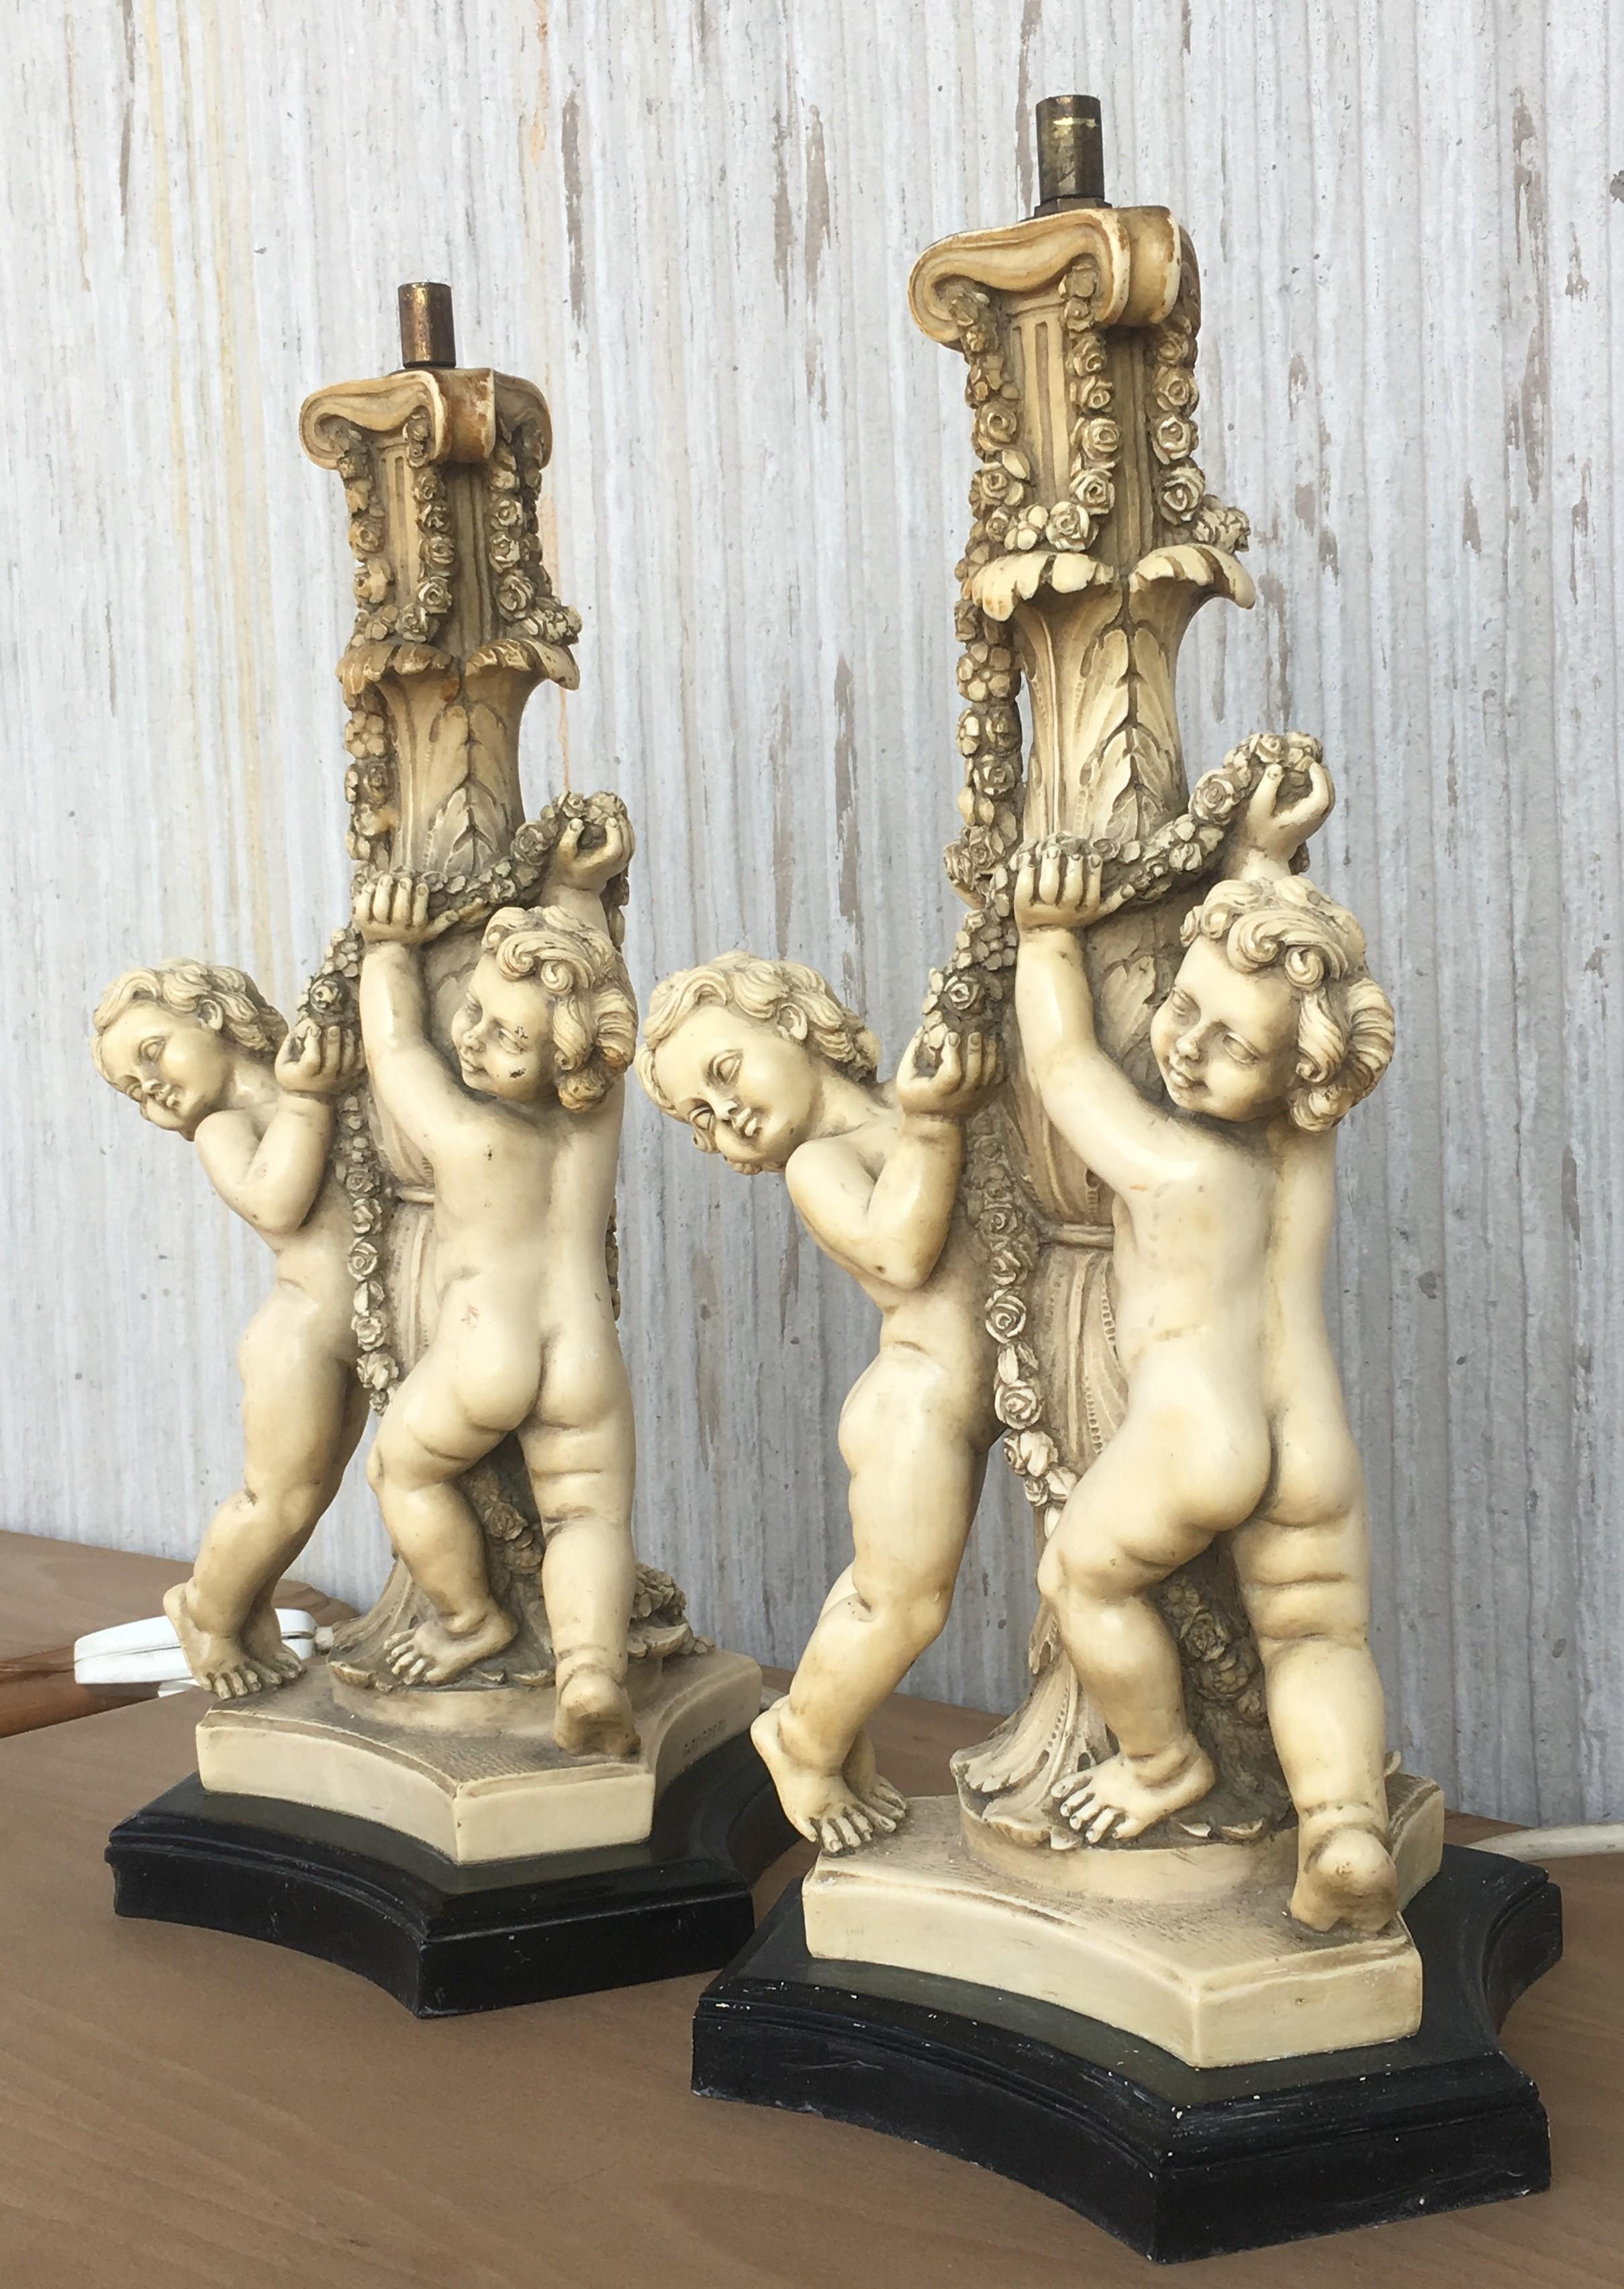 These lamps have a white creram glazed finish that covers this pair of resin cherubs from Italy in the early 20th century. They sit upon black finish wooden bases.
By sculptor G. Ruggeri, Italy

Gino Ruggeri was from Italy - G. Ruggeri, is one of